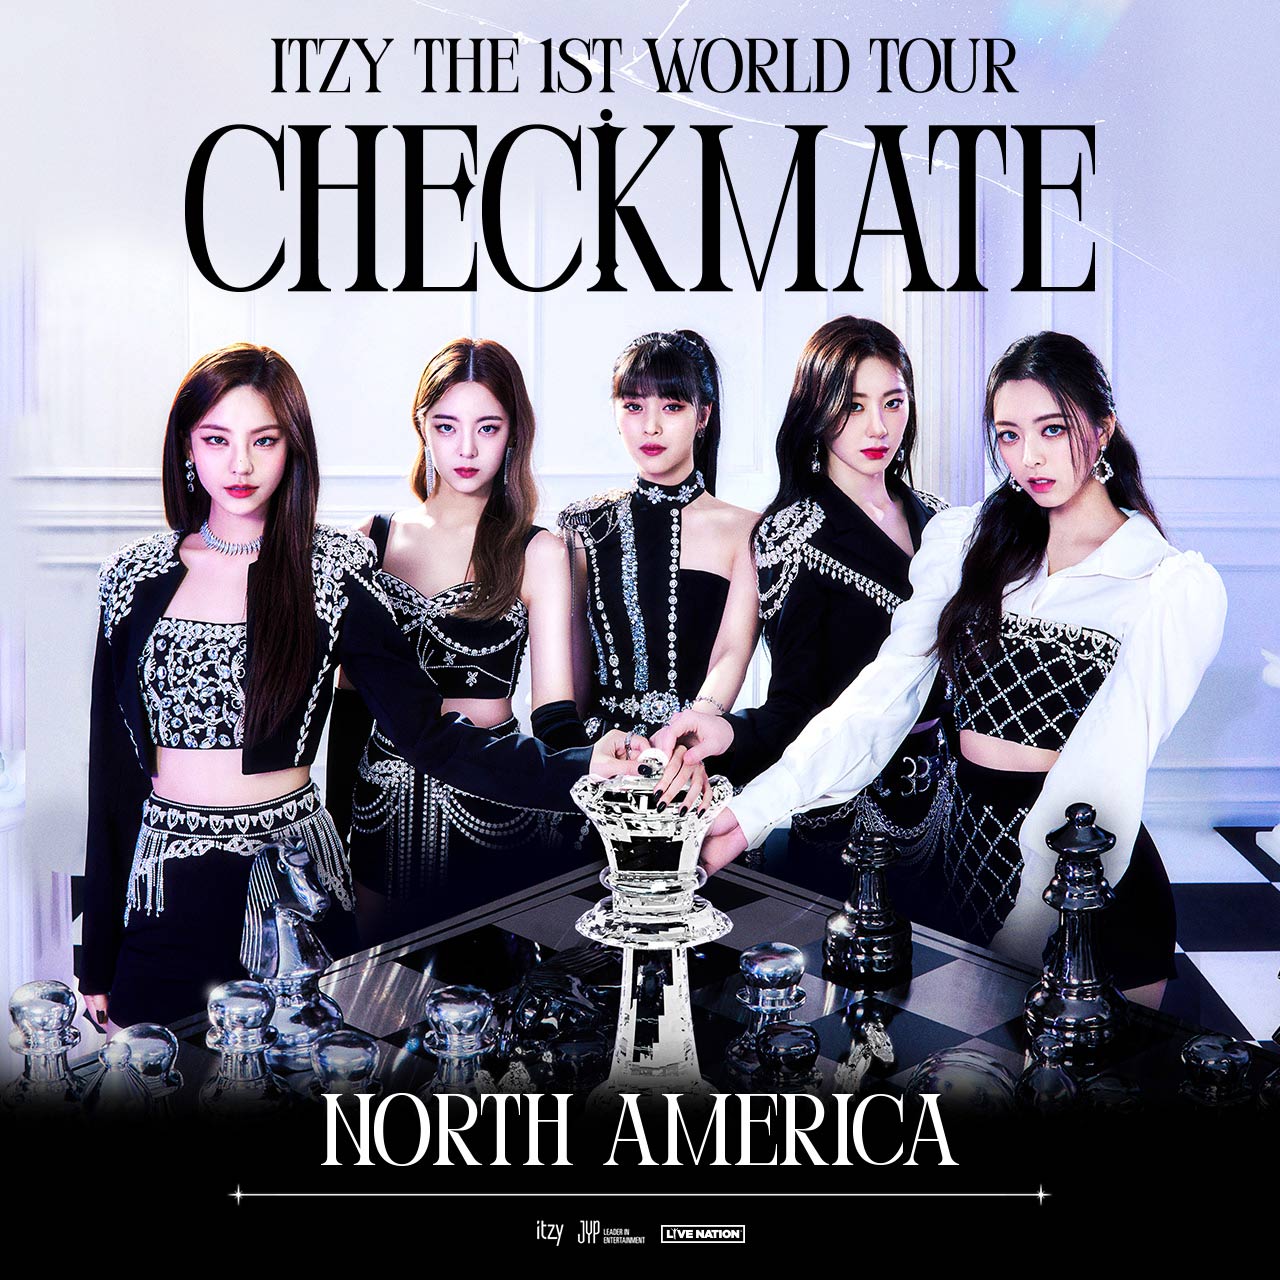 THE 1ST WORLD TOUR CHECKMATE